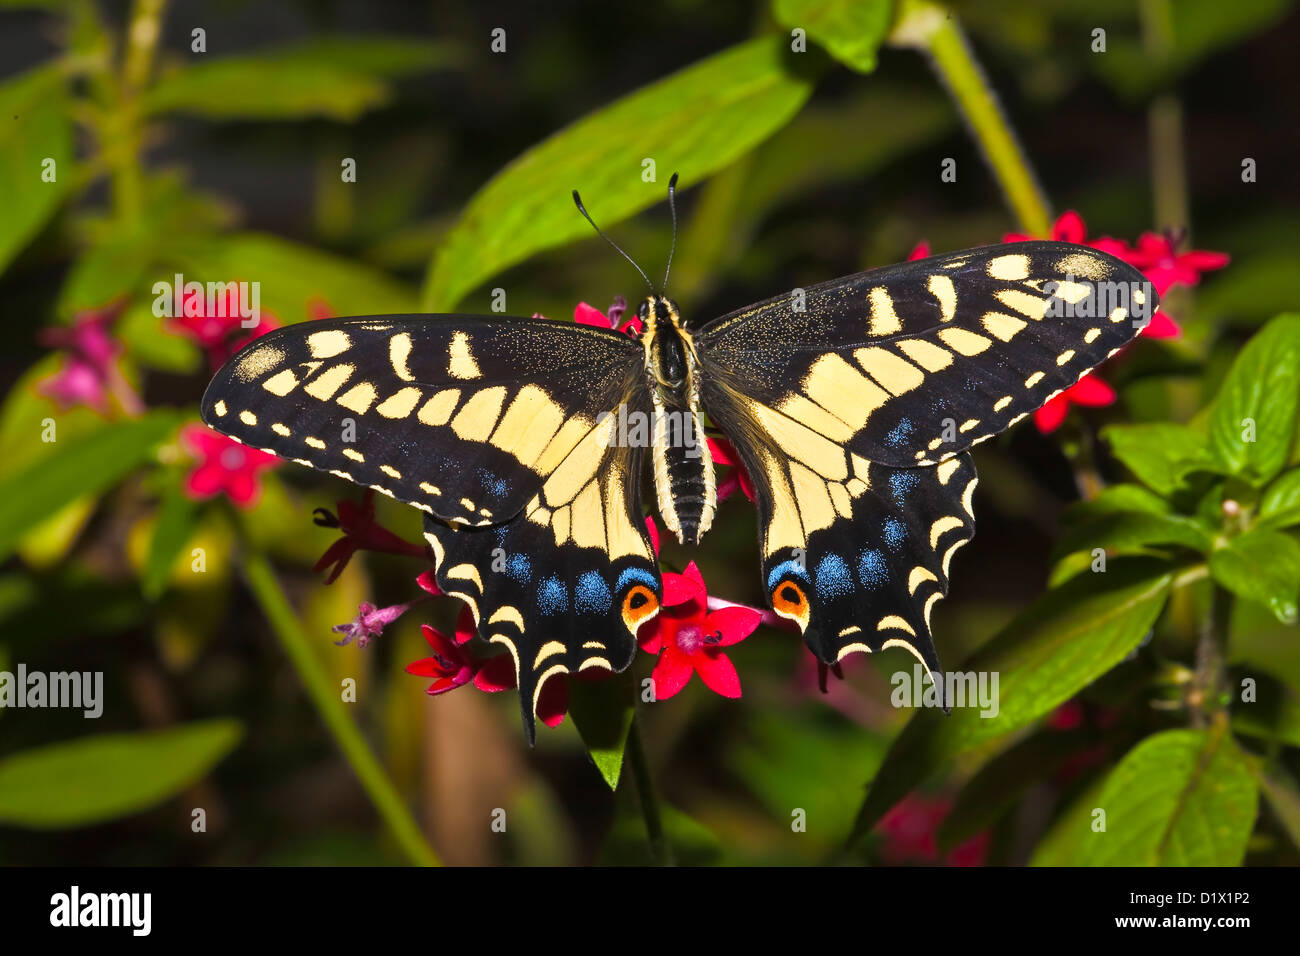 Anise Swallowtail butterfly (Papilio zelicaon) on green foilage with red flowers Stock Photo